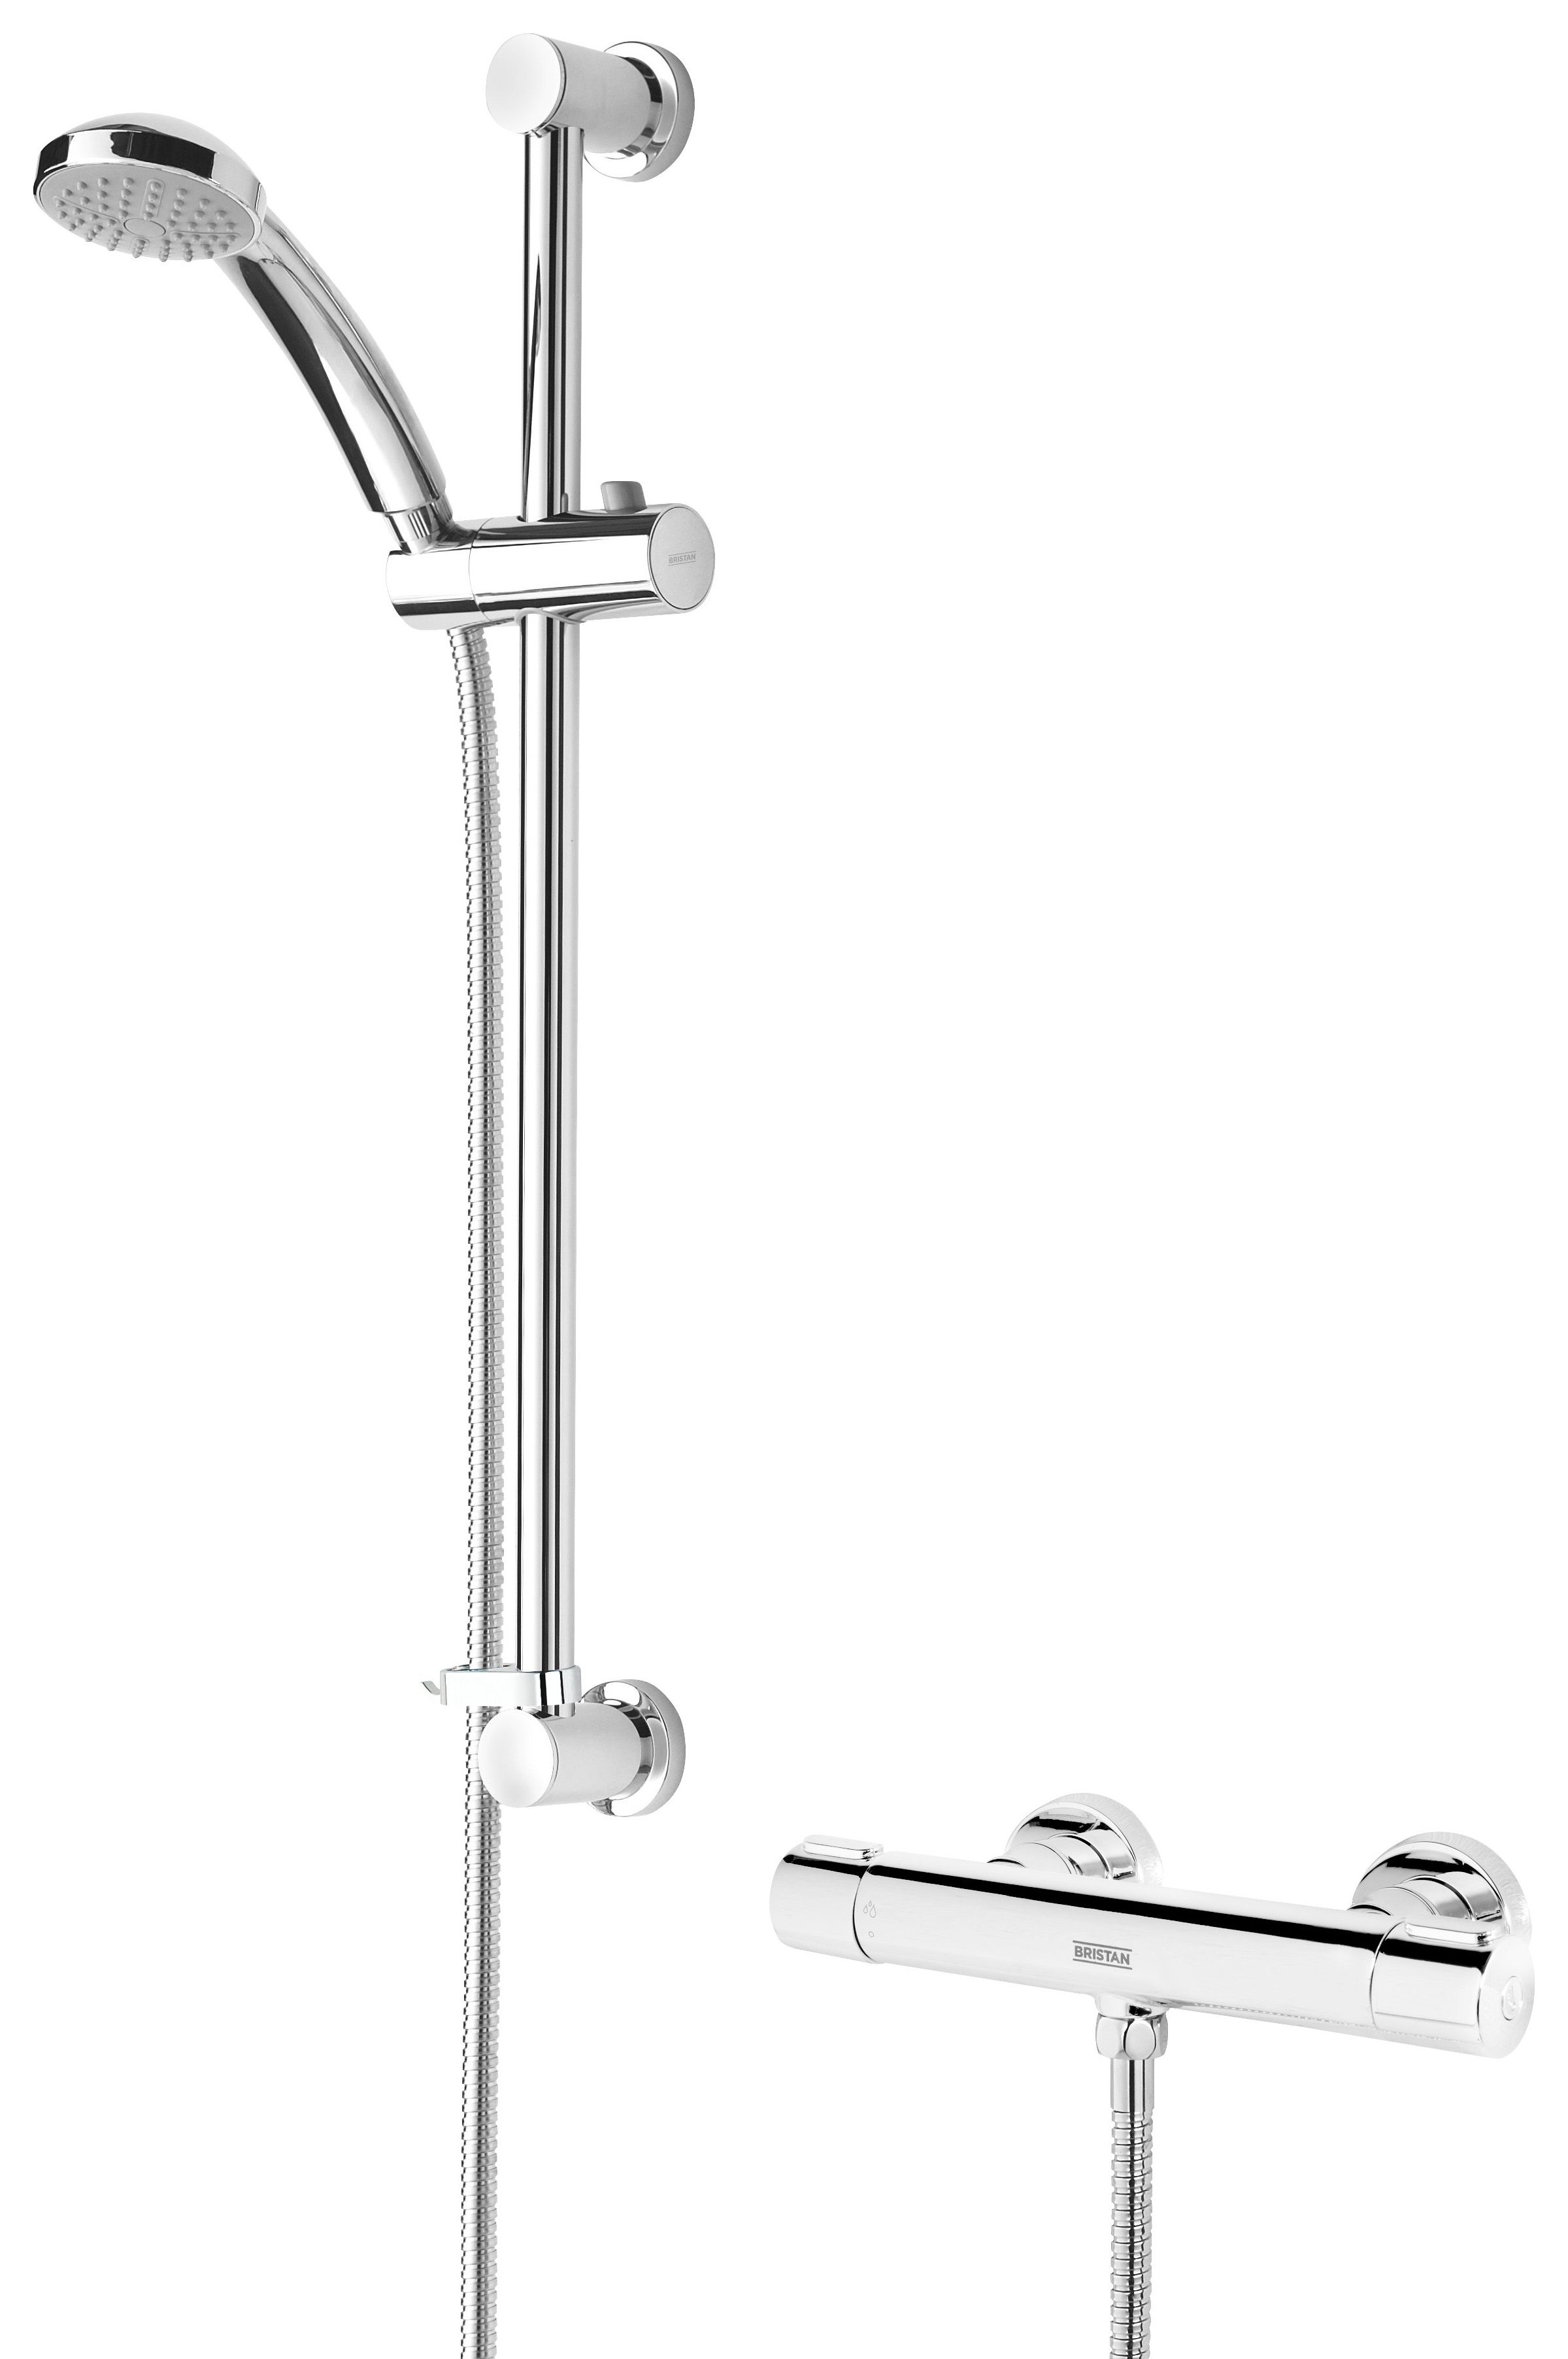 Image of Bristan Frenzy Safe Touch Mixer Shower with Kit & Fast Fit Connections - Chrome